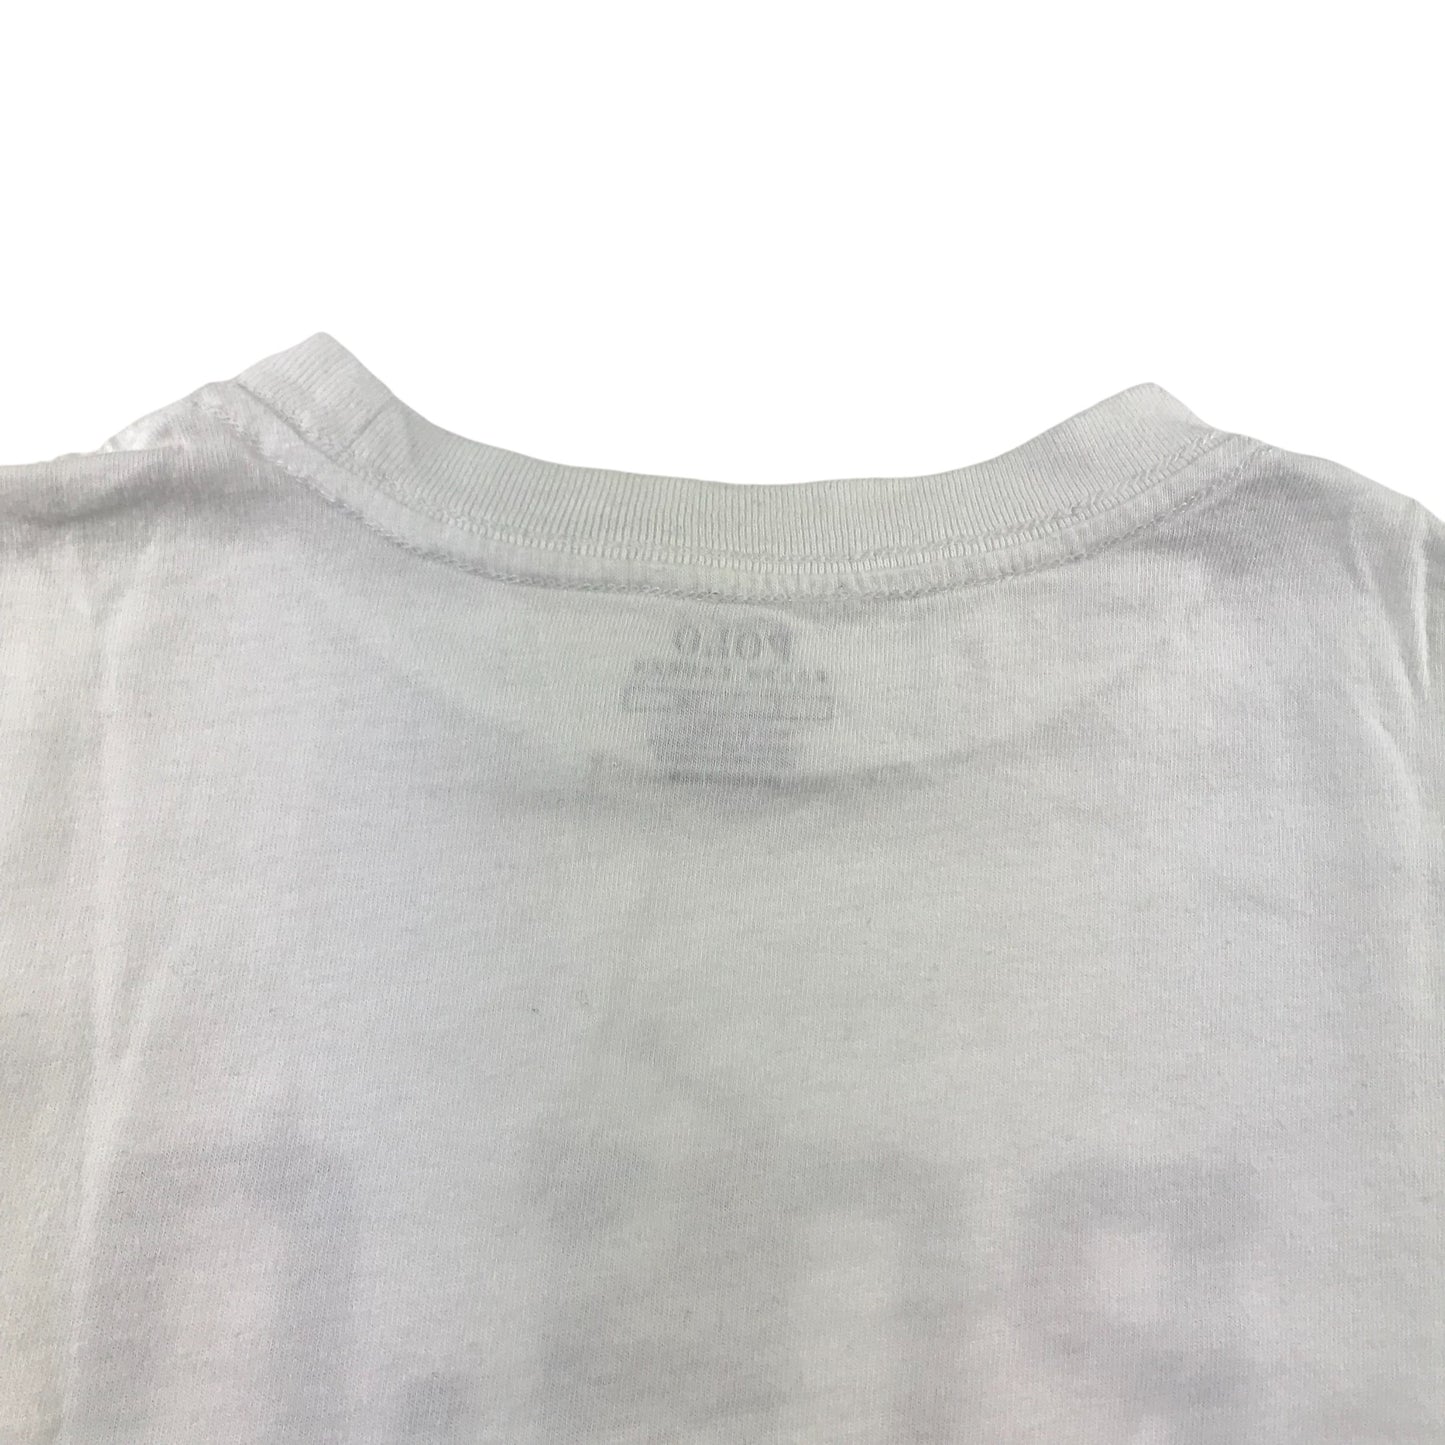 Ralph Lauren T-shirt Age 7 White Text Graphic and Logo Cotton